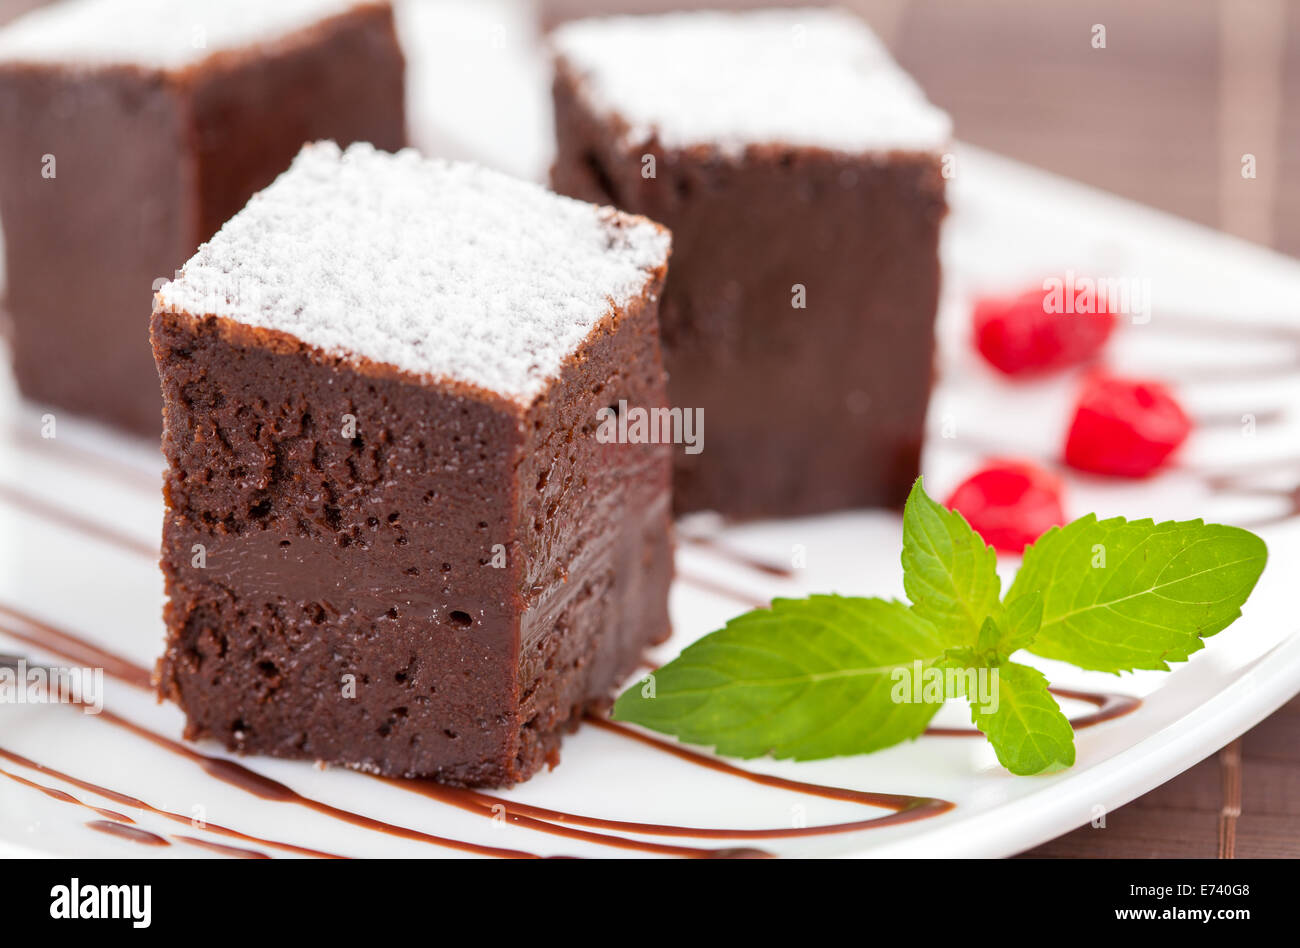 sweet brownies or chocolate fancy cakes Stock Photo